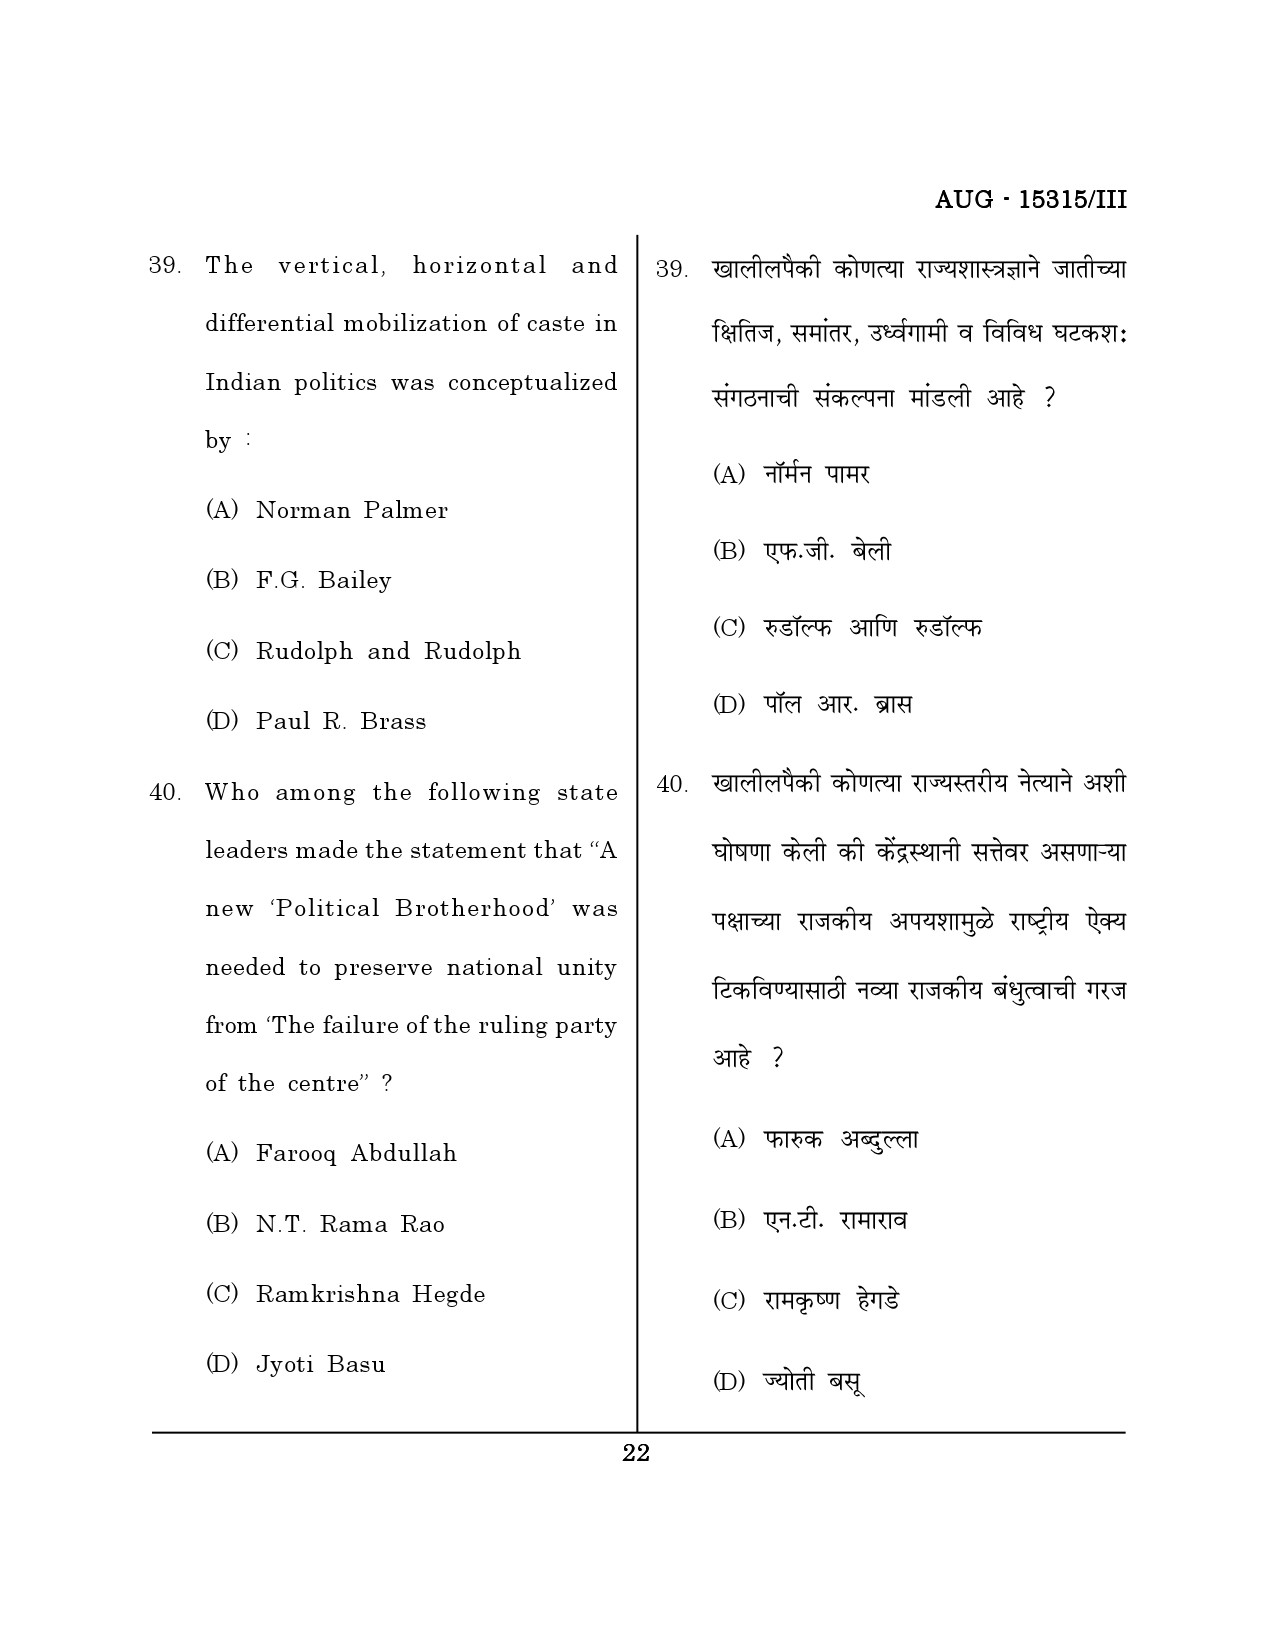 Maharashtra SET Political Science Question Paper III August 2015 21